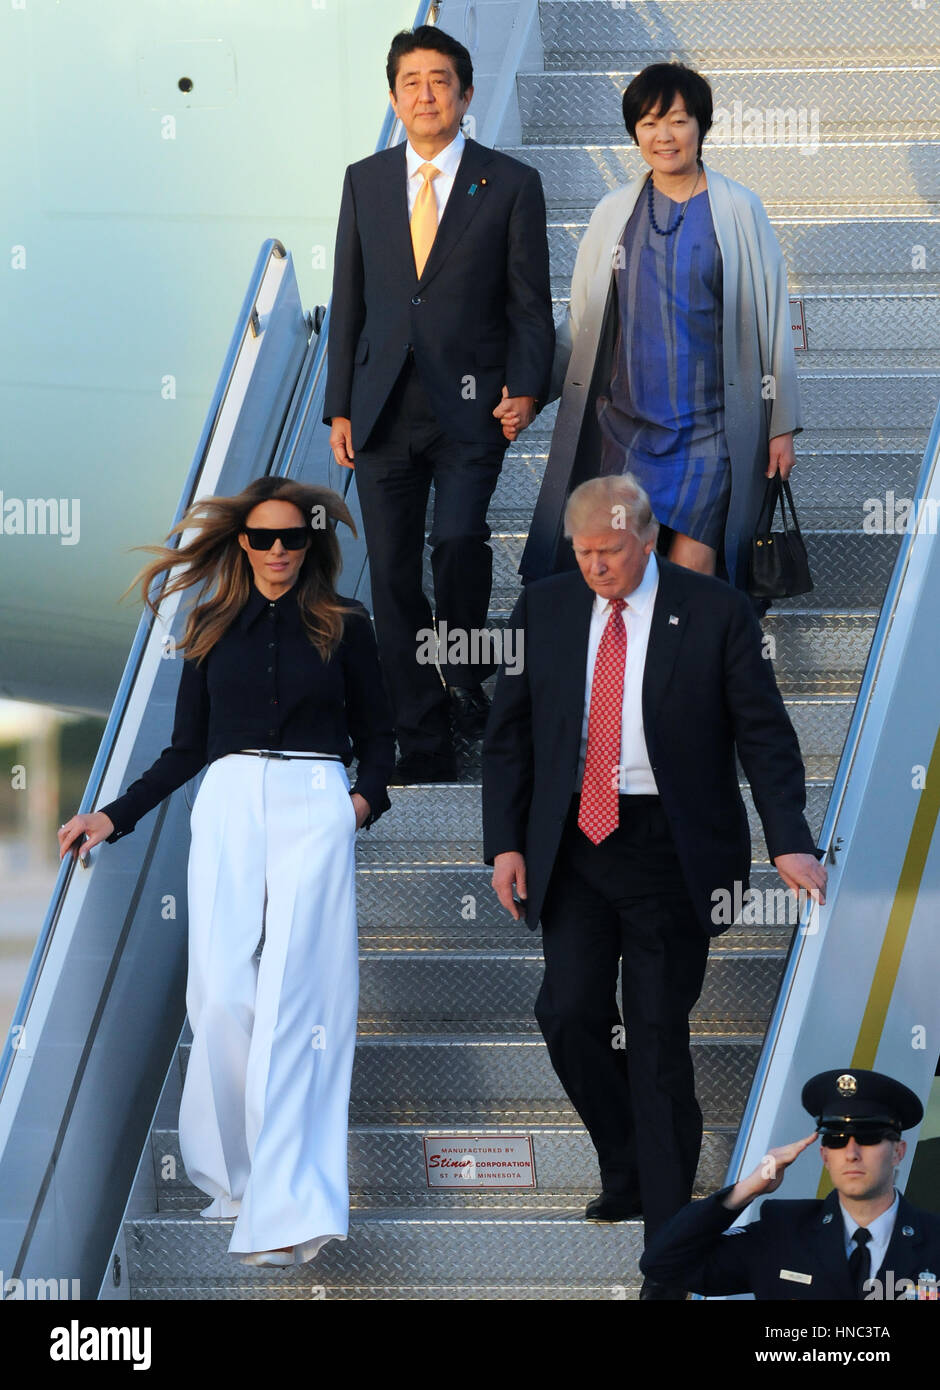 West Palm Beach, Florida, USA. 10th Feb, 2017. U.S. President Donald Trump (bottom R) walks down the stairway from Air Force One after arriving at Palm Beach International Airport in Florida on February 10, 2017. Trump was accompanied by First Lady Melania Trump (bottom L), and by Japanese Prime Minister Shinzo Abe (top L) and his wife, Akie Abe (top R). President Trump invited the Japanese leader to spend the weekend at Trump's Mar-A-Lago estate in Palm Beach, Florida, dubbed the 'Winter White House', where they will hold meetings and play golf. Credit: Paul Hennessy/Alamy Live News Stock Photo